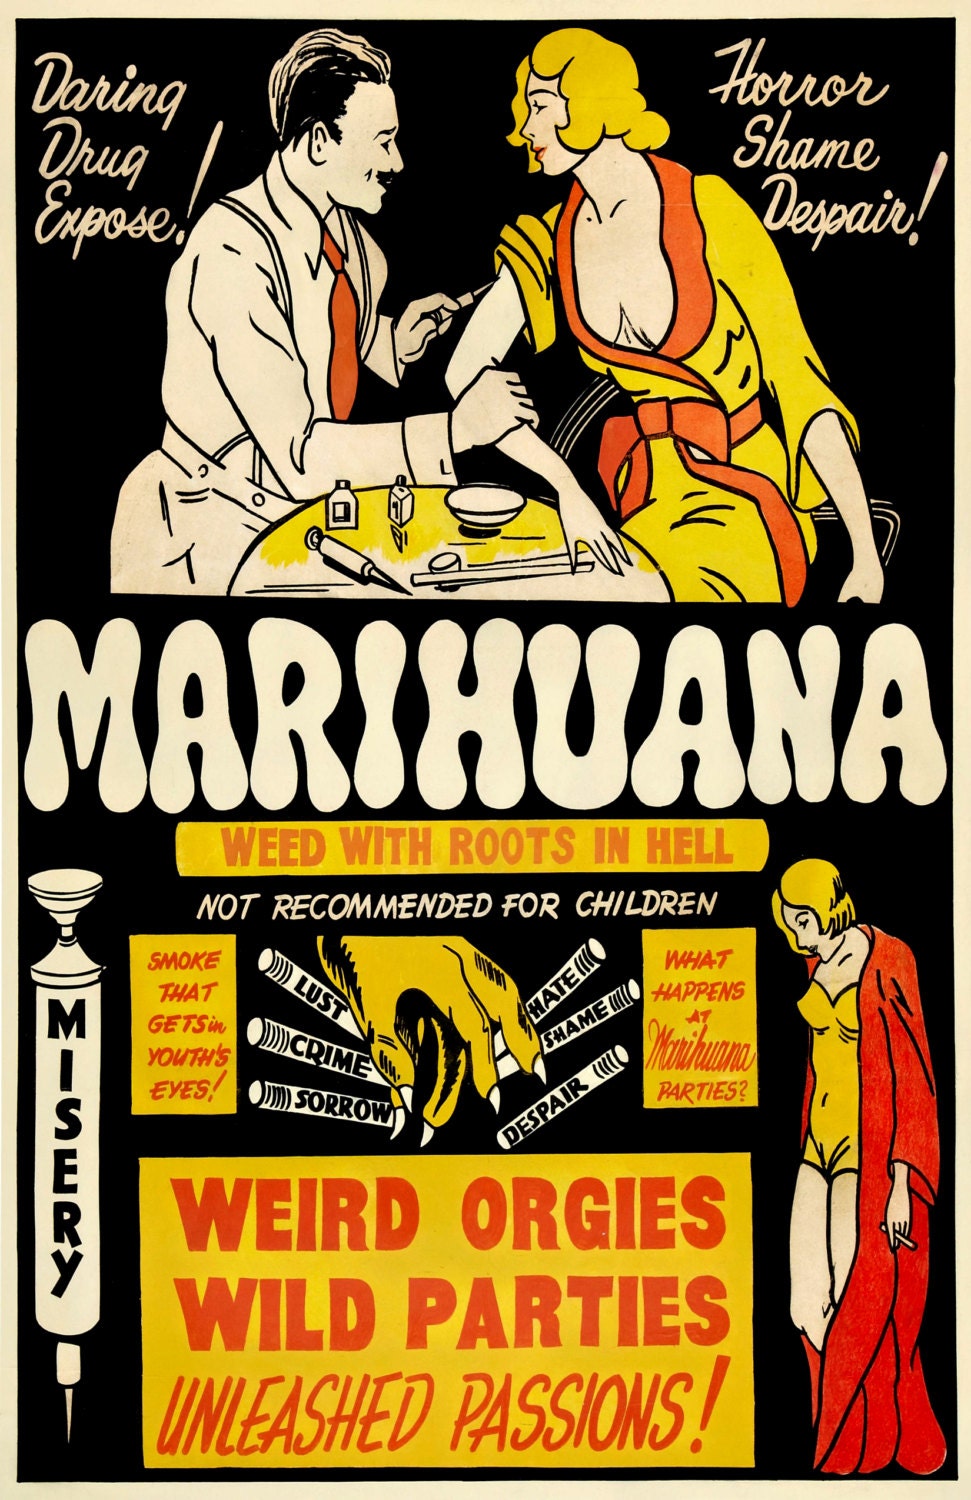 Marihuana Weed Roots in Hell Poster  Propaganda  Drug War  Reprint  Radical Poster Project  Brand New